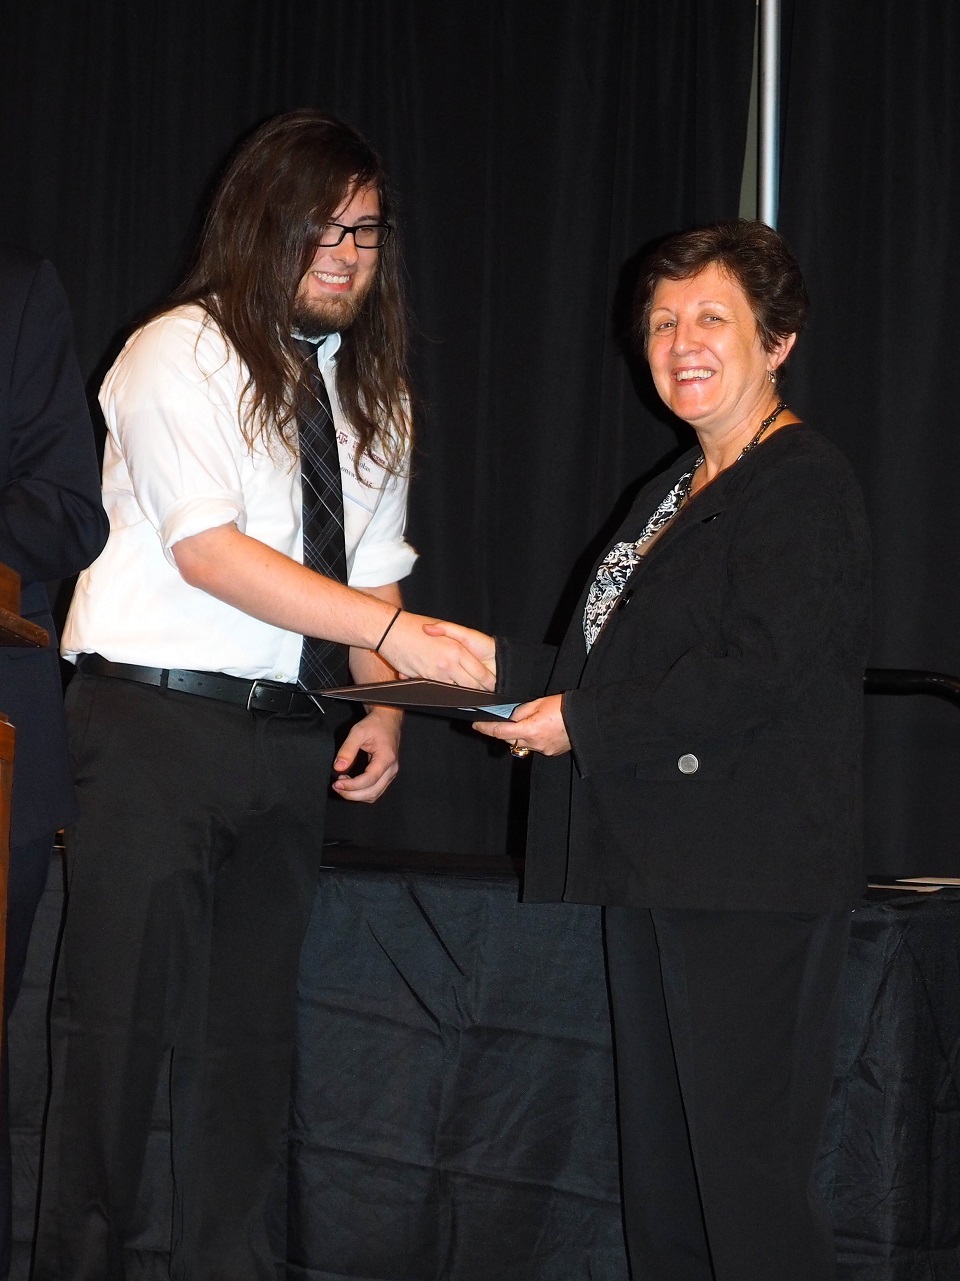 Spring 2016 student receiving award from faculty